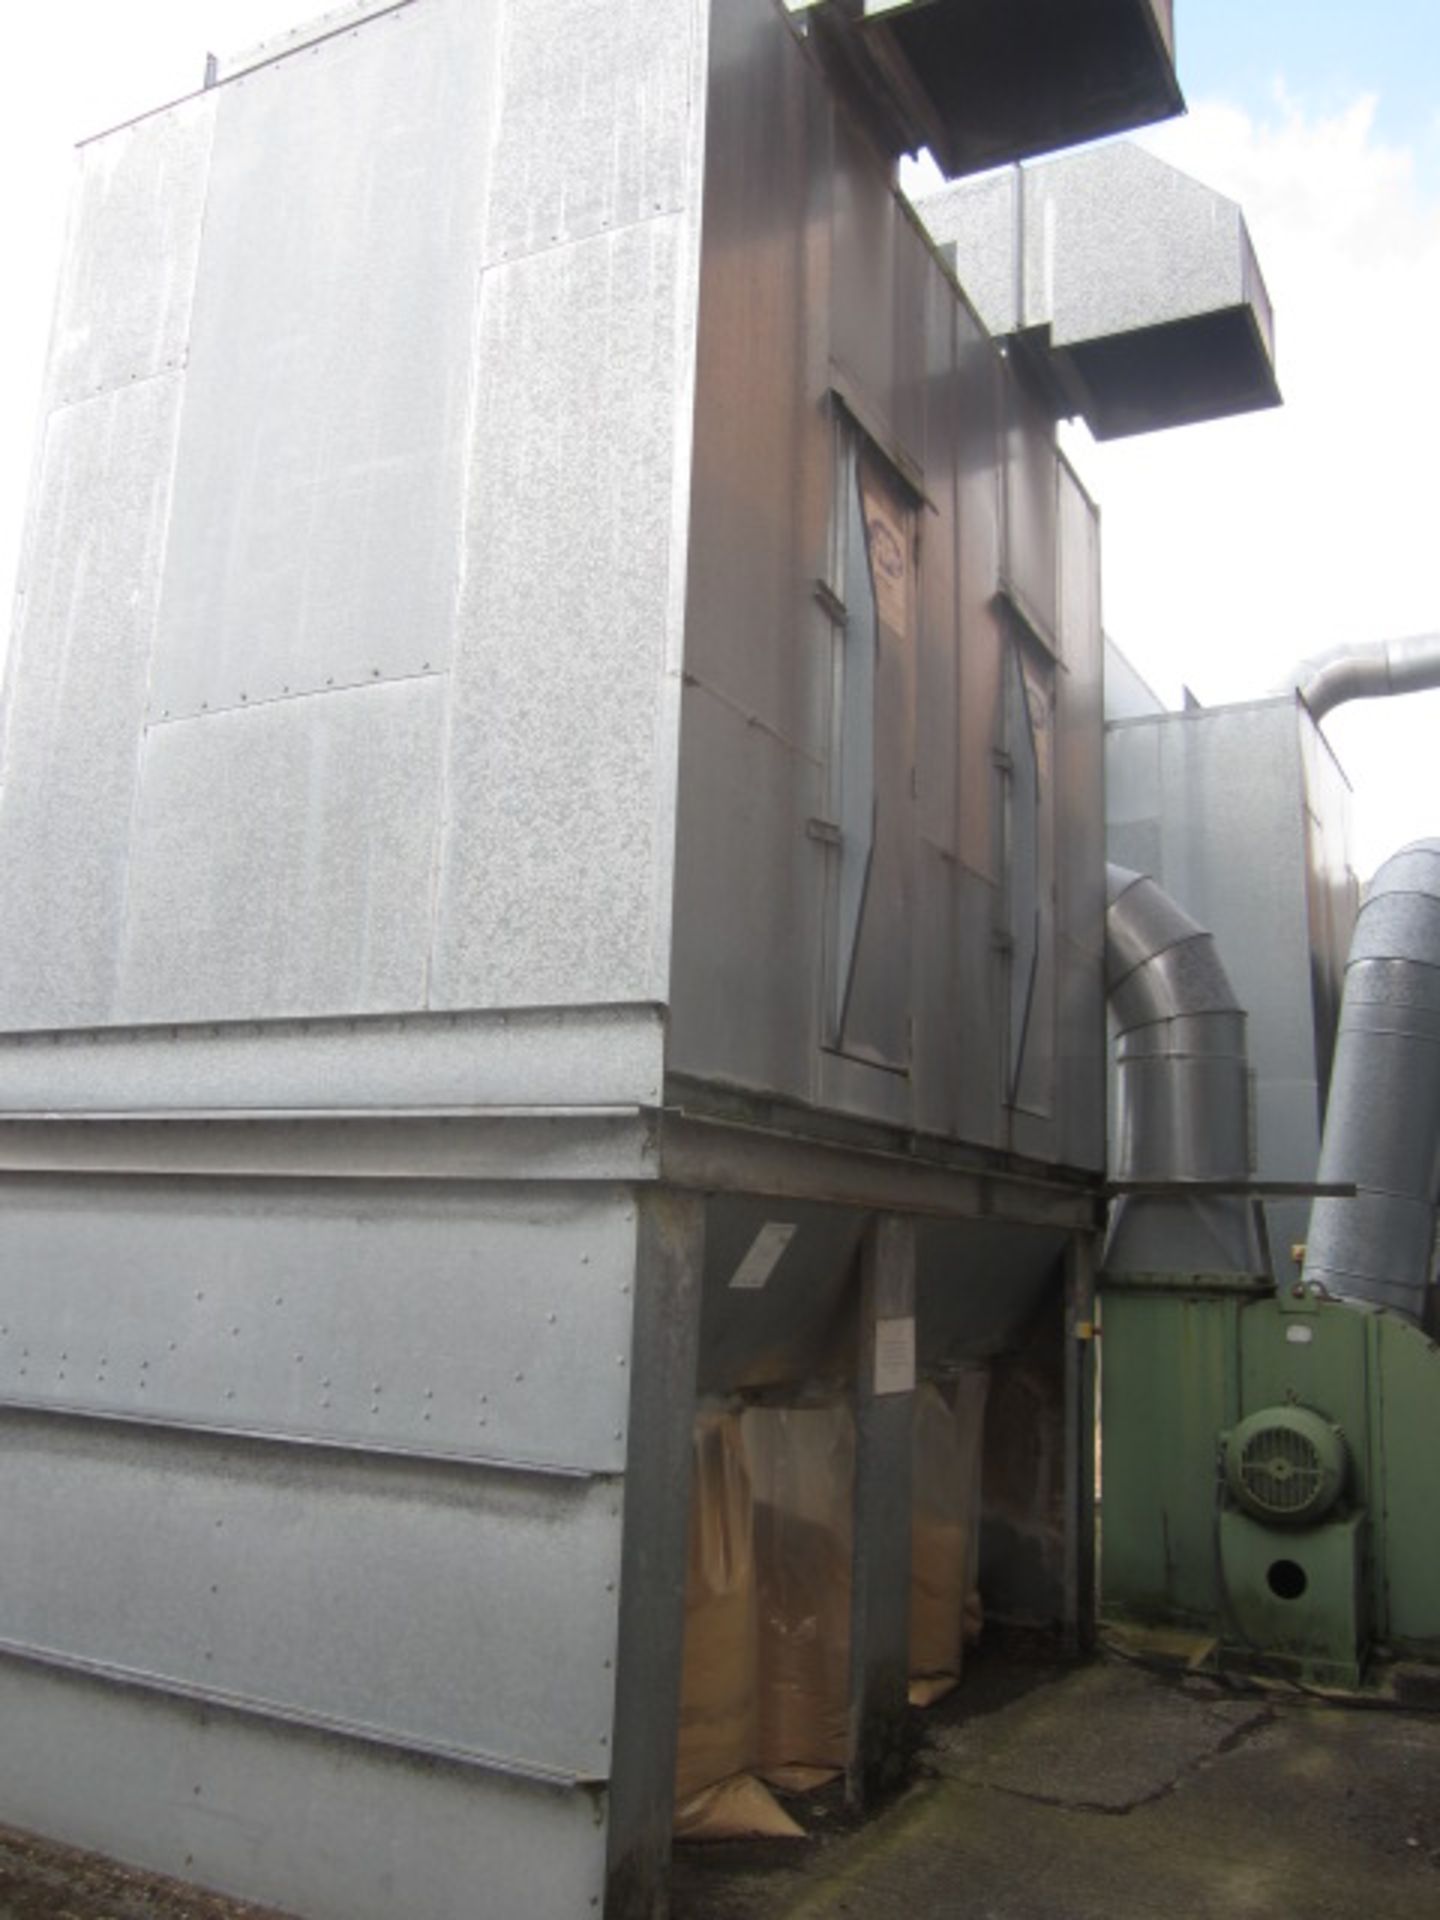 Airplants galvanised steel, heavy duty dust extraction unit, with 10 bag outlet, APL 60MD extraction - Image 8 of 8